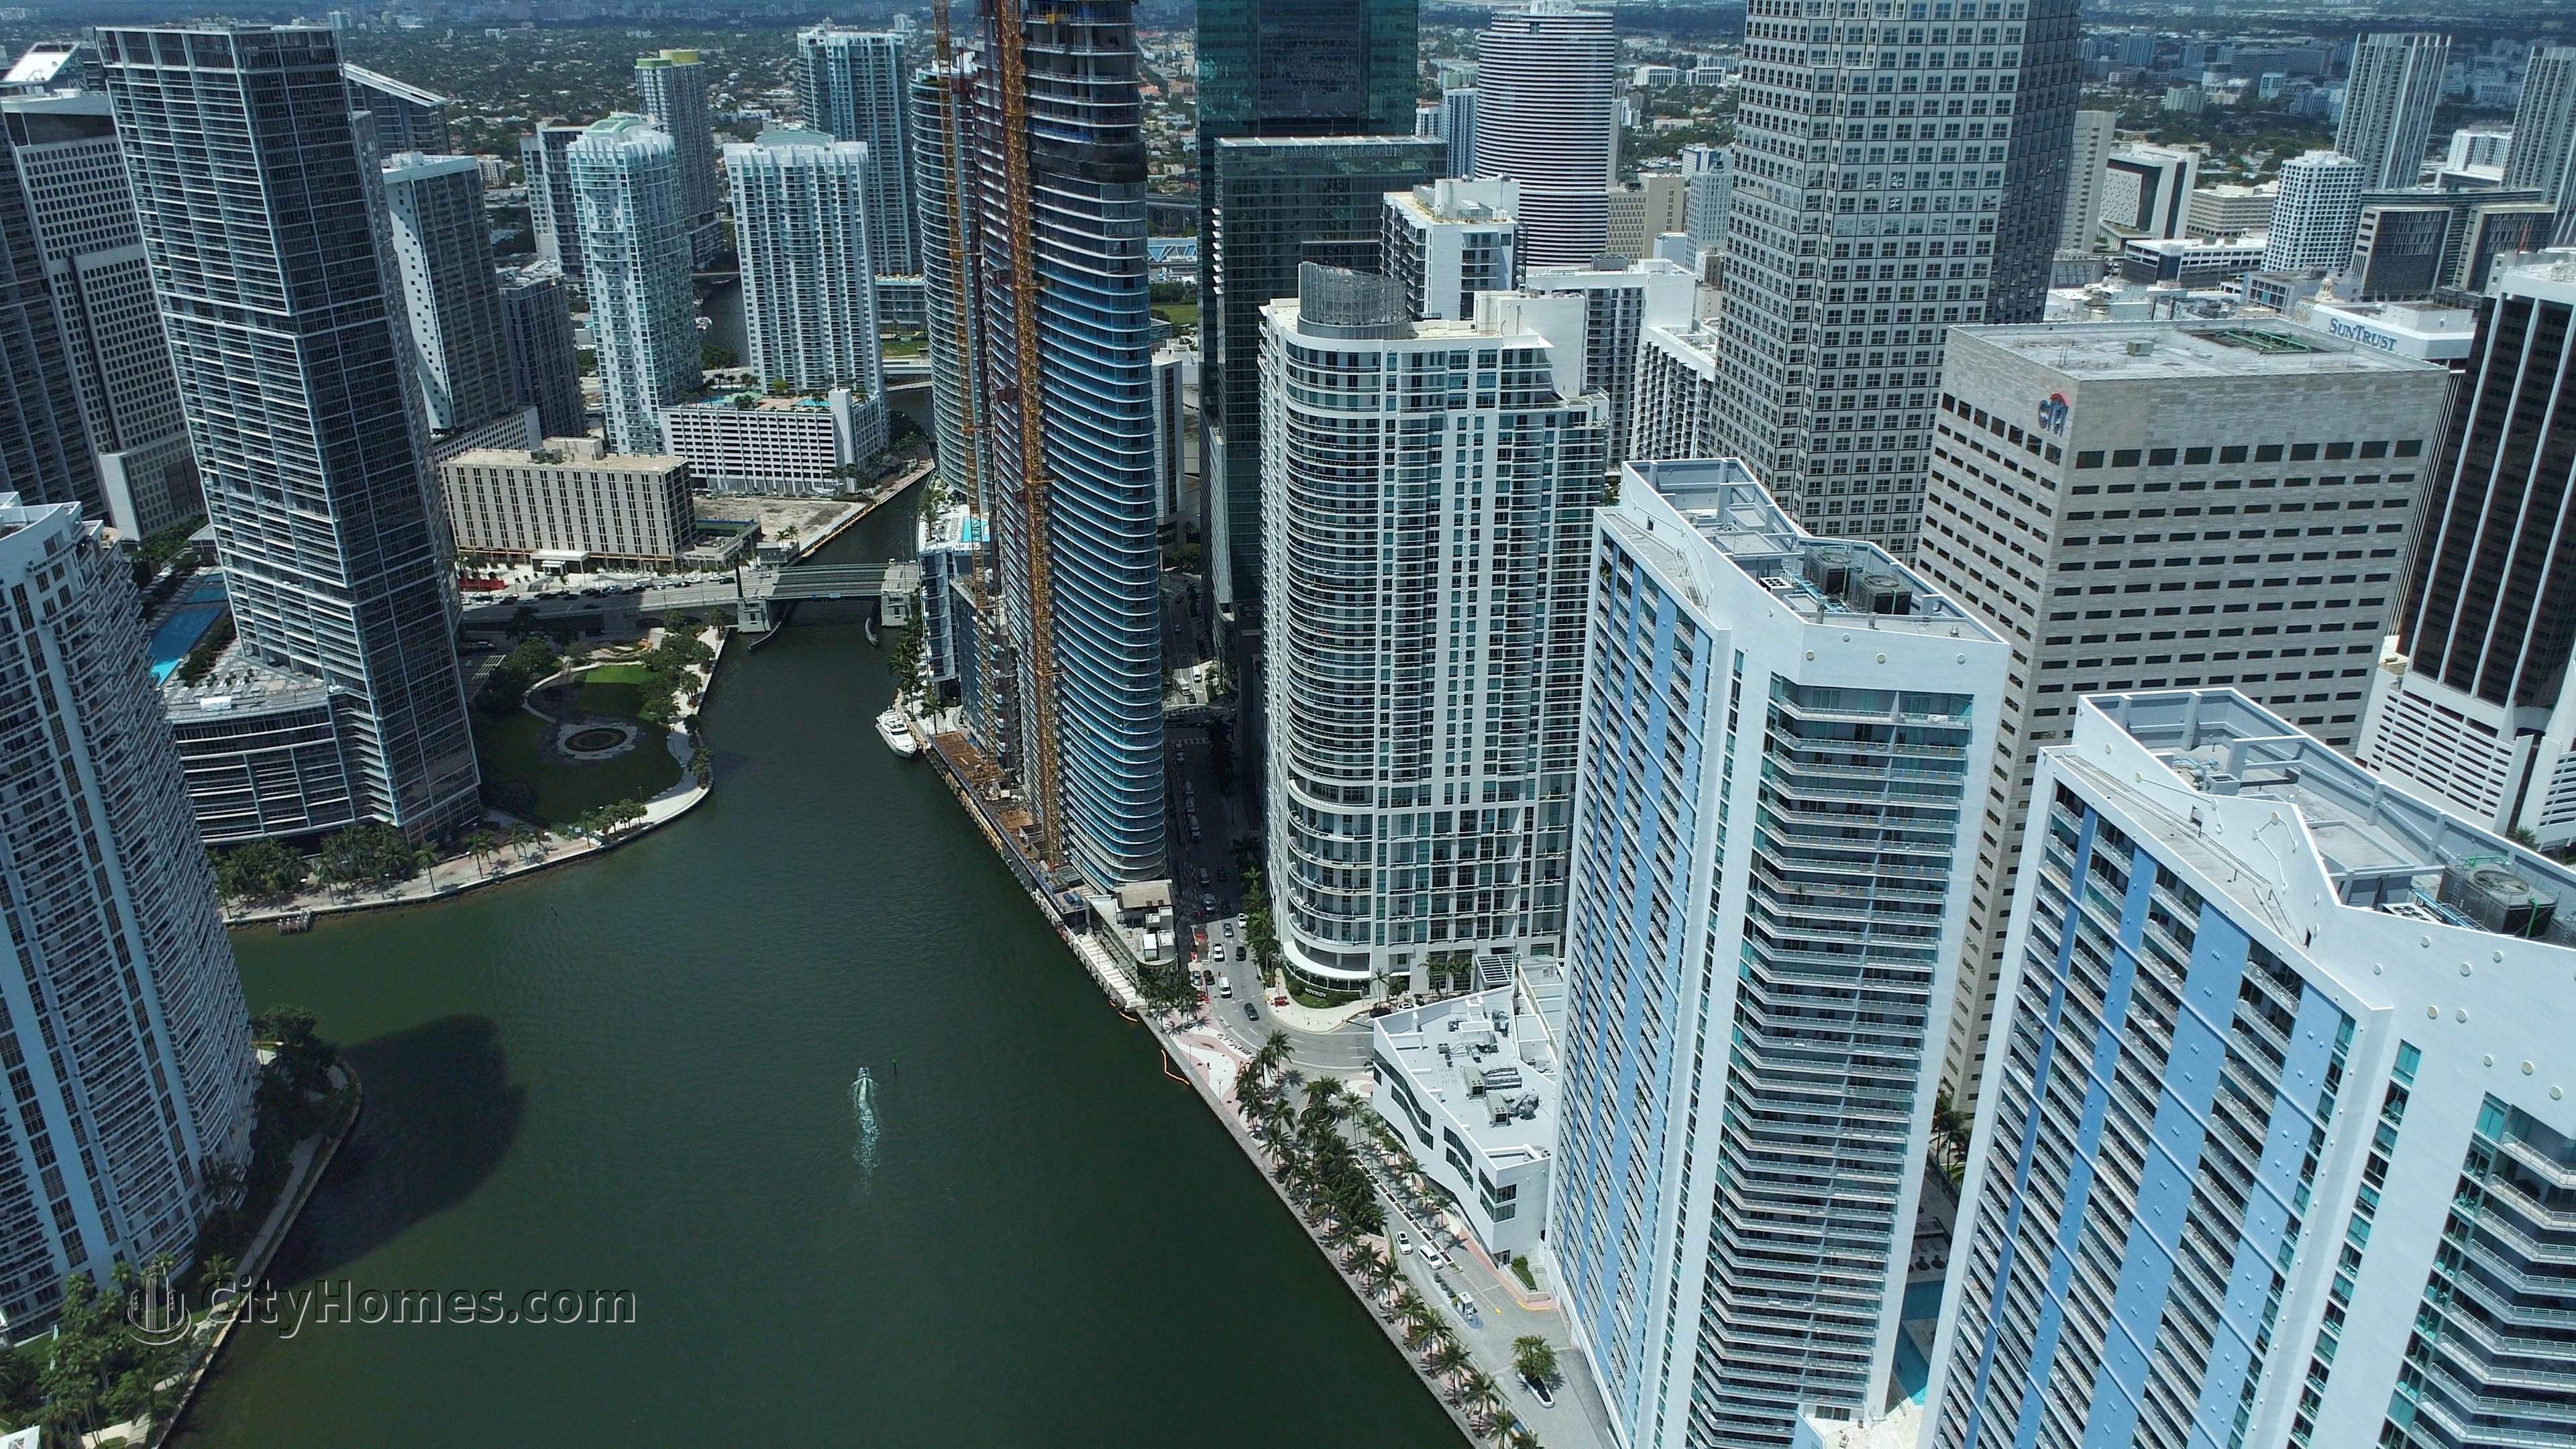 5. One Miami building at 325 And 335 S Biscayne Blvd, Miami, FL 33131